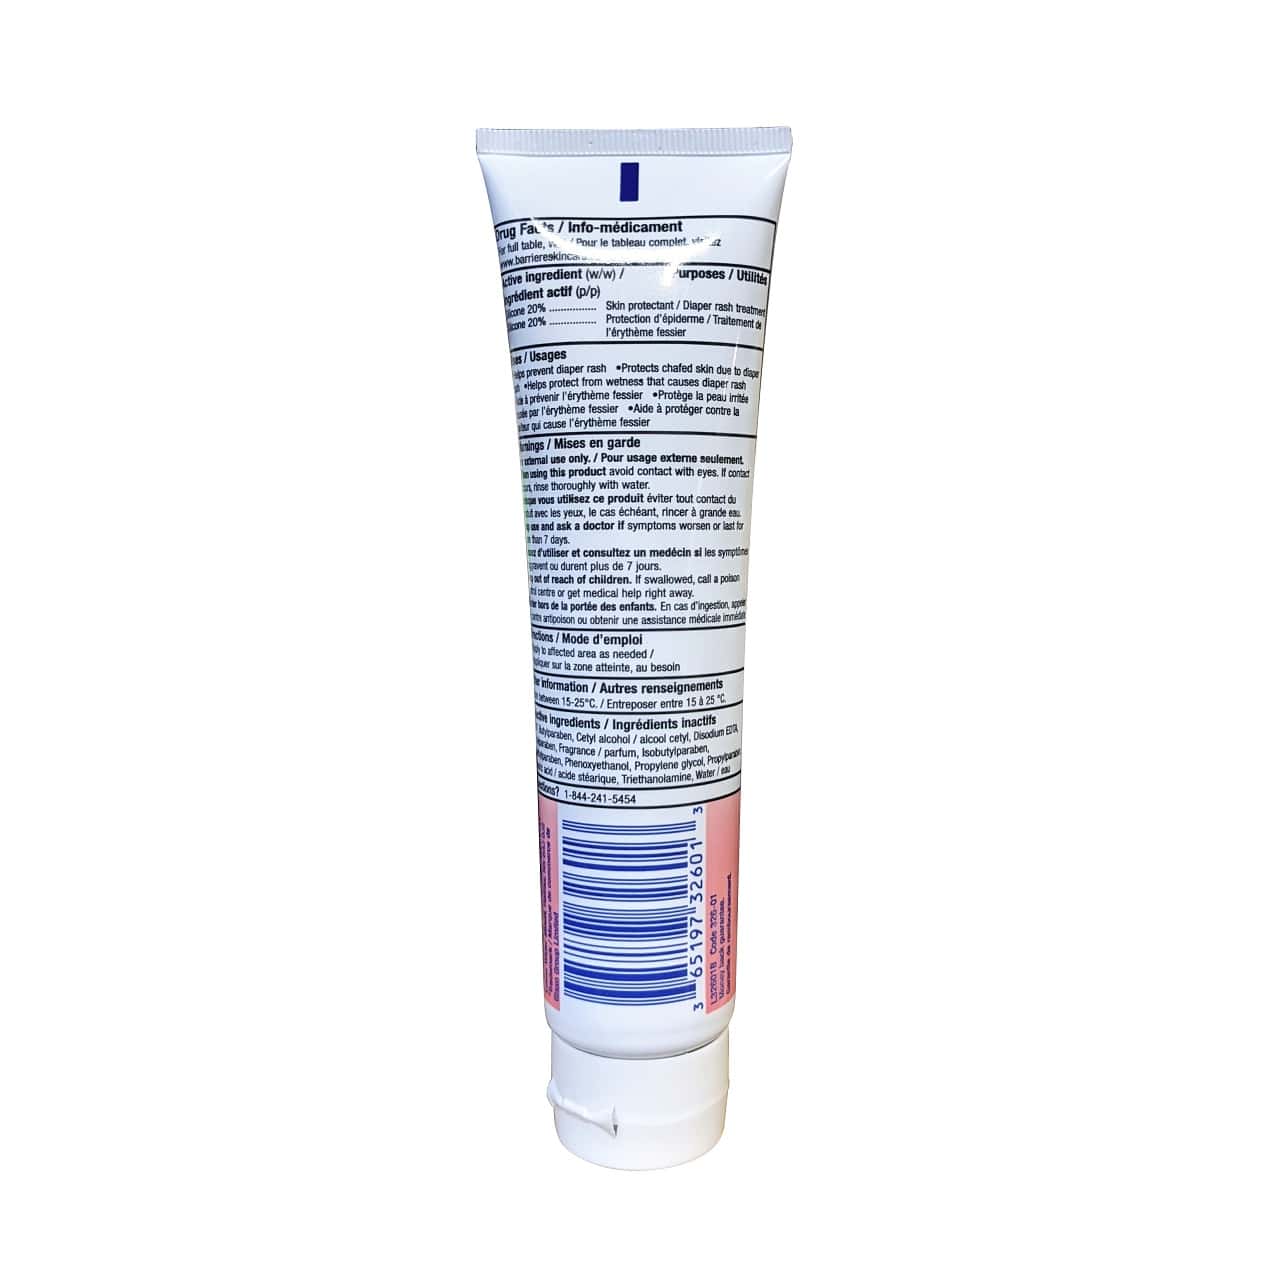 Ingredients, cautions, uses, cautions for Barriere Silicon Skin Cream (50 grams)